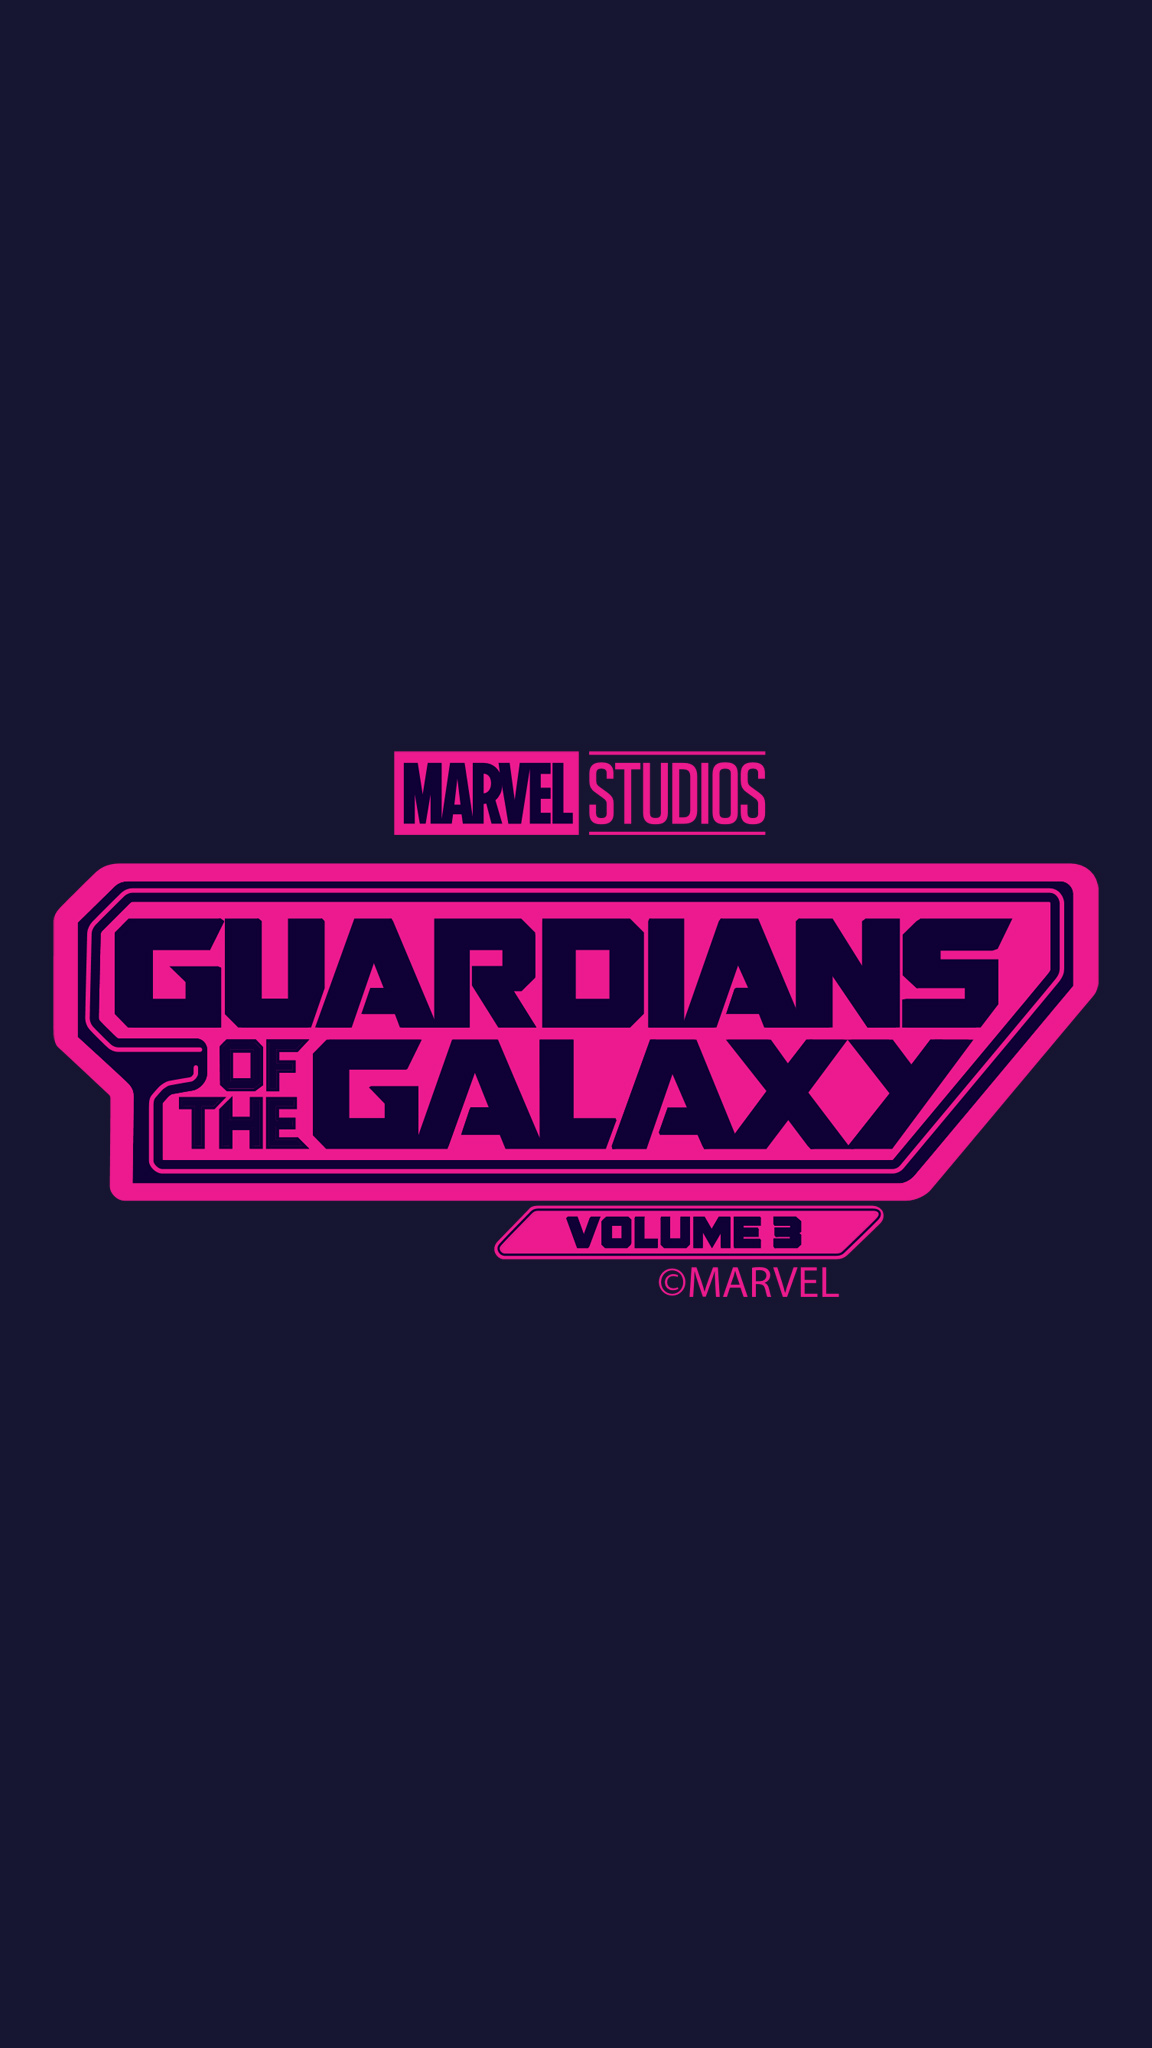 Guardians of the Galaxy 3 wallpapers for desktop and mobile - YouLoveIt.com